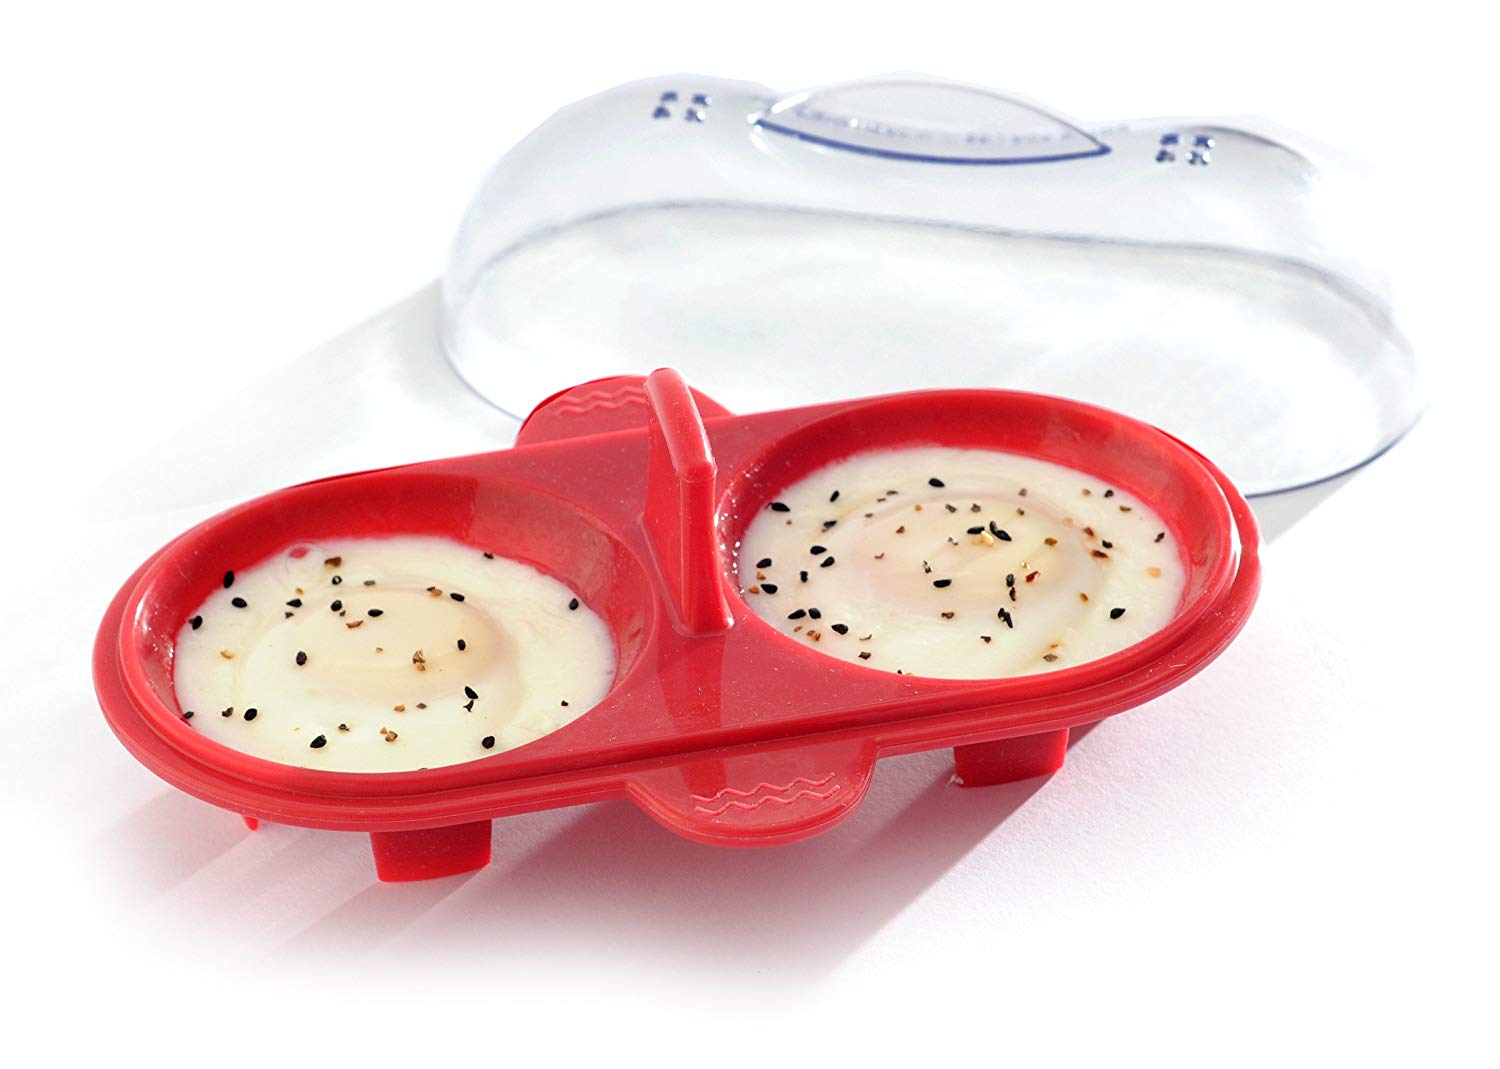  Norpro Silicone Egg Cooker